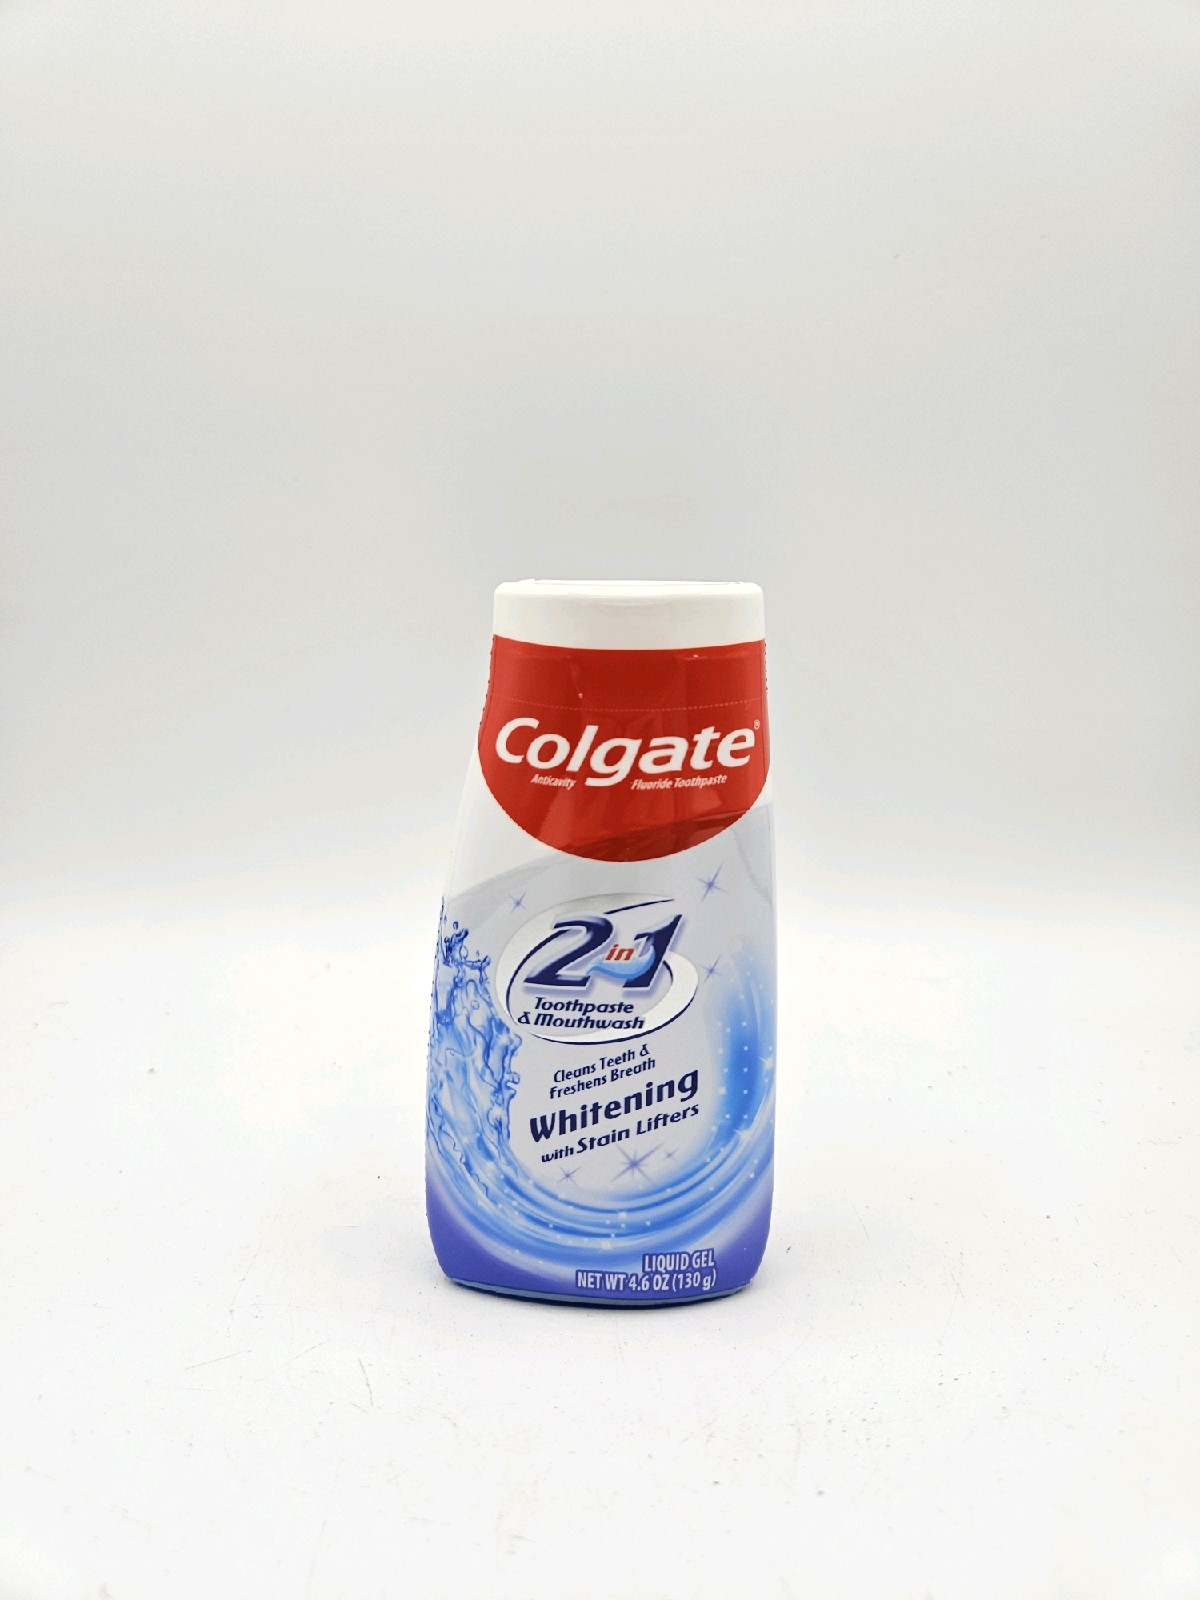 Colgate 2 in 1 Toothpaste and Whitening Mouthwash, Mint, 4.6 oz Squeeze Bottle